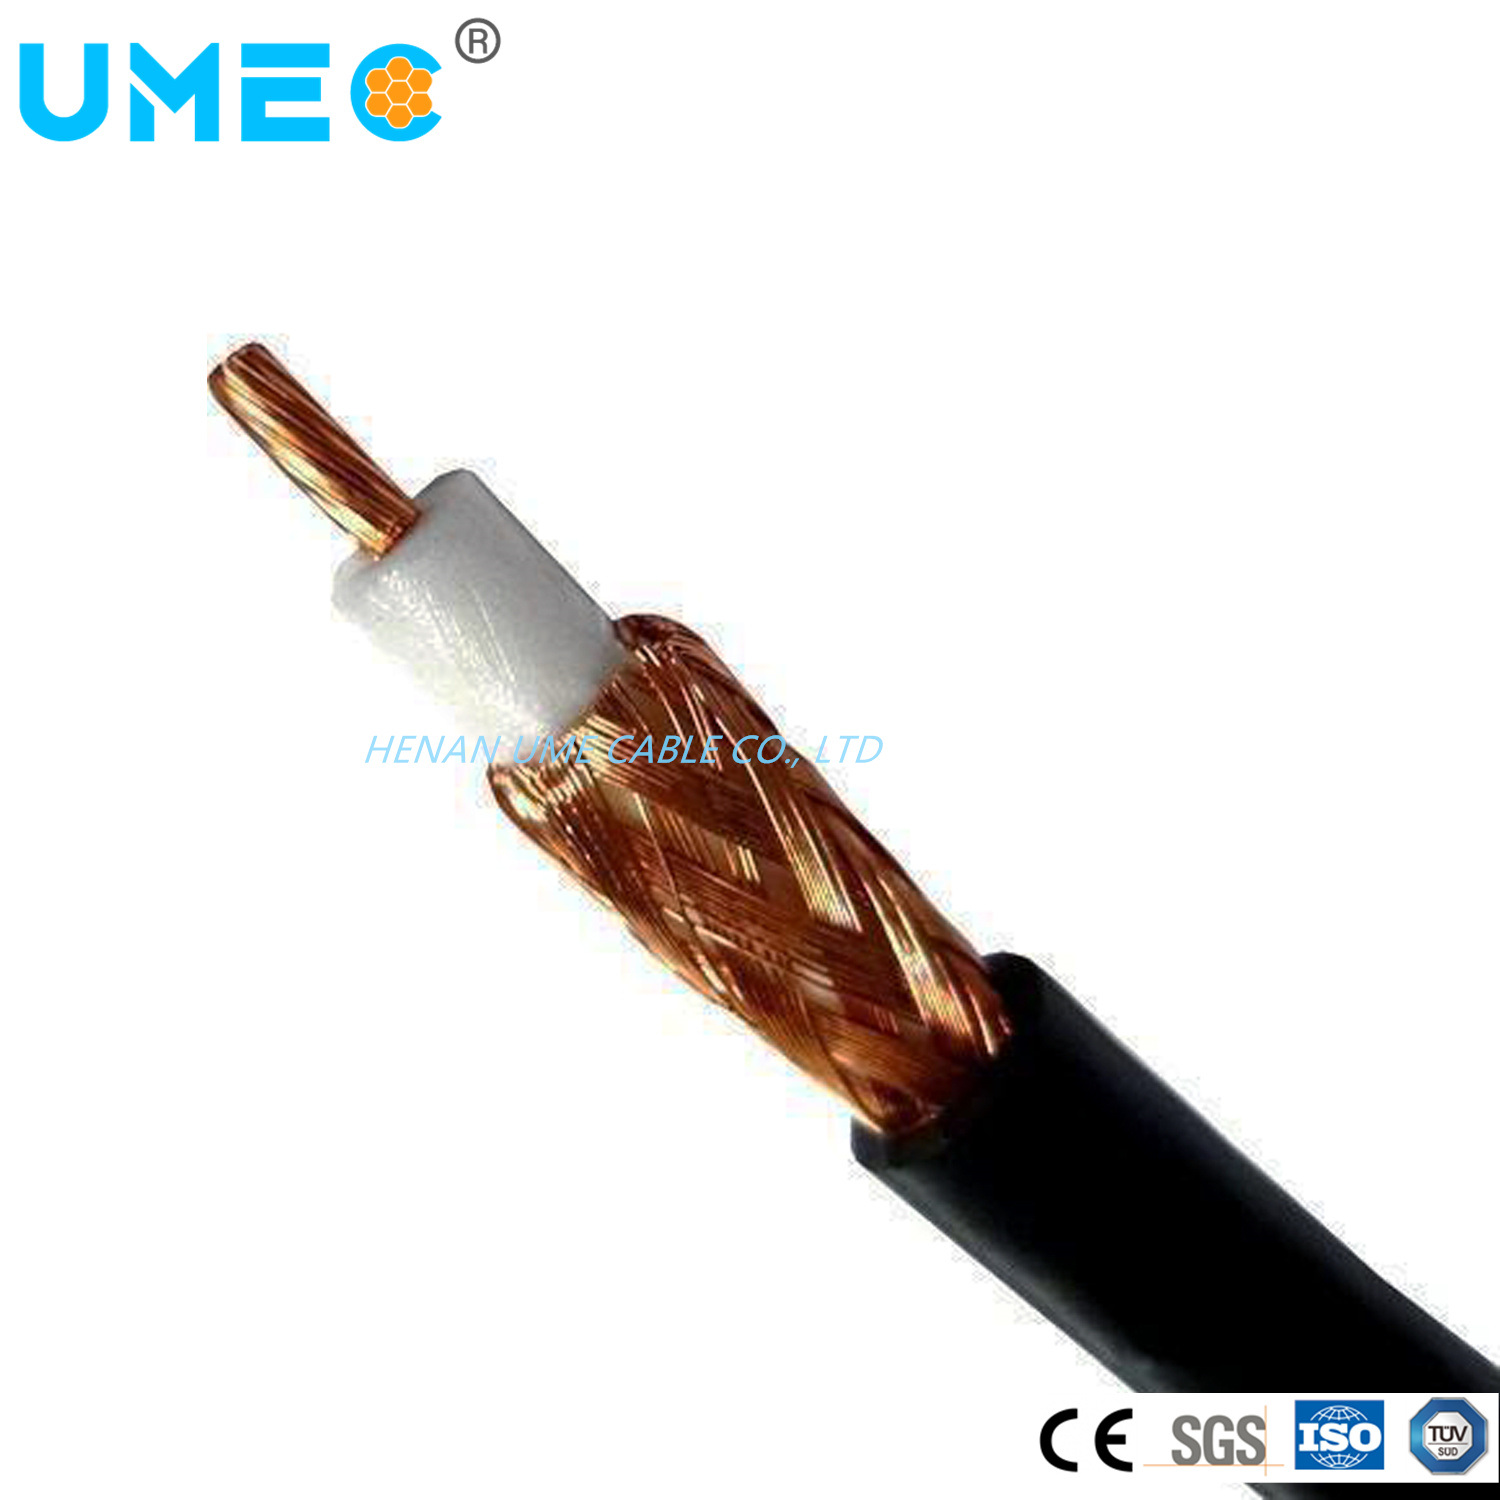 XLPE Insulation Electrical Building Wire Concentric Cable Aluminum or Aluminum Alloy Core